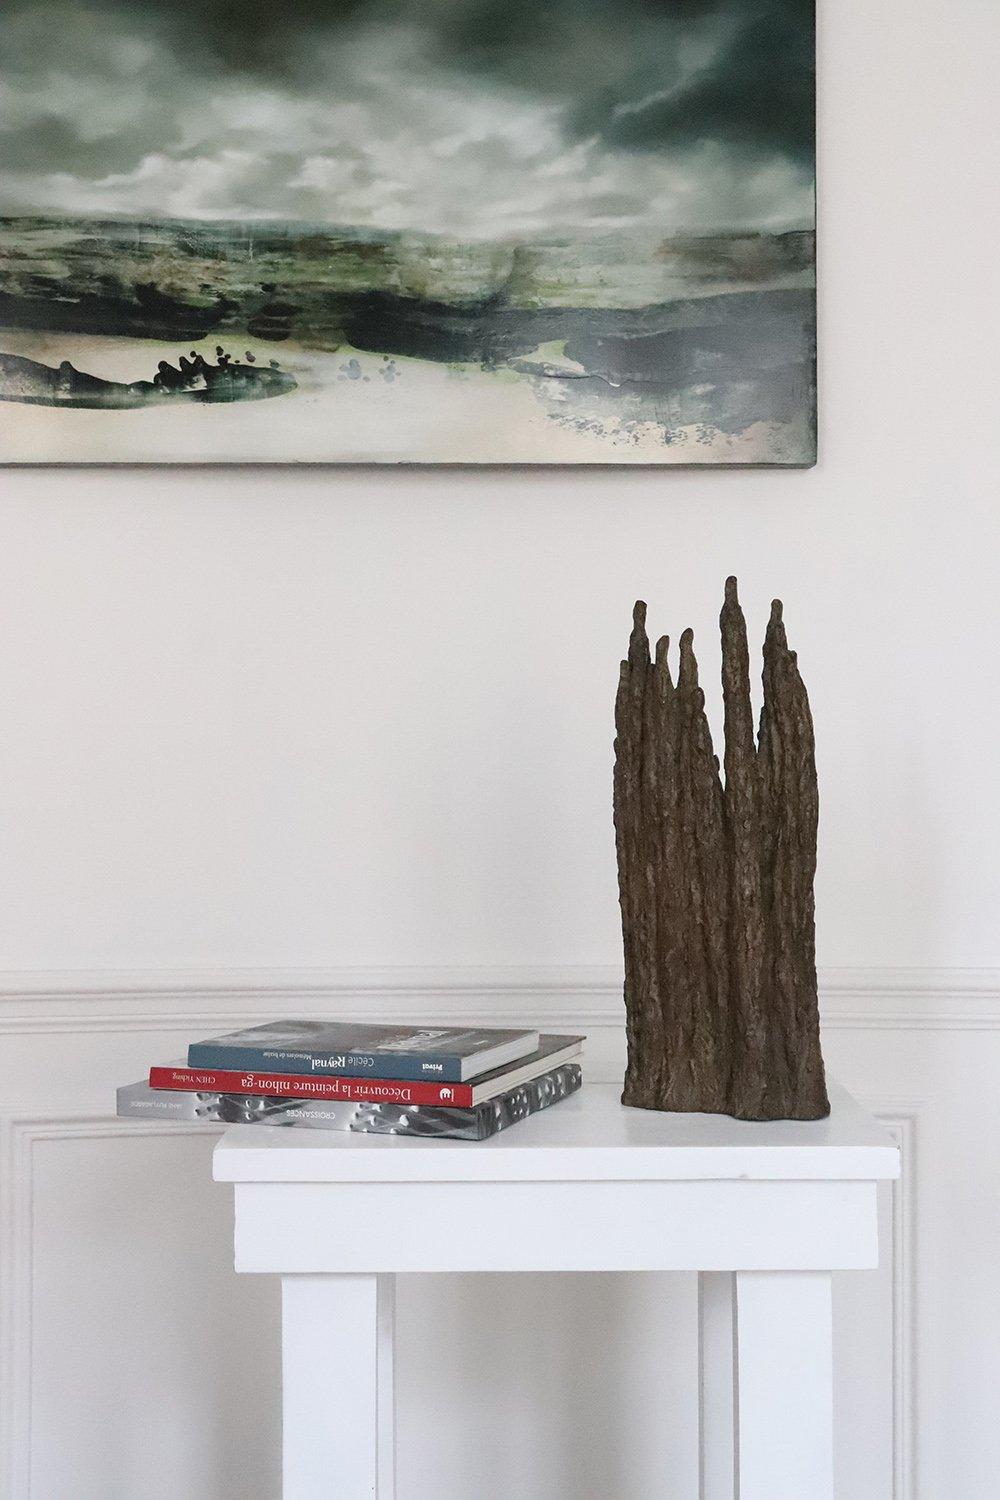 Cathedral is a bronze sculpture by French contemporary artist Delphine Brabant, dimensions are 43 × 17 × 9 cm (16.9 × 6.7 × 3.5 in). 
The sculpture is signed and numbered, it is part of a limited edition of 8 editions + 4 artist’s proofs, and comes